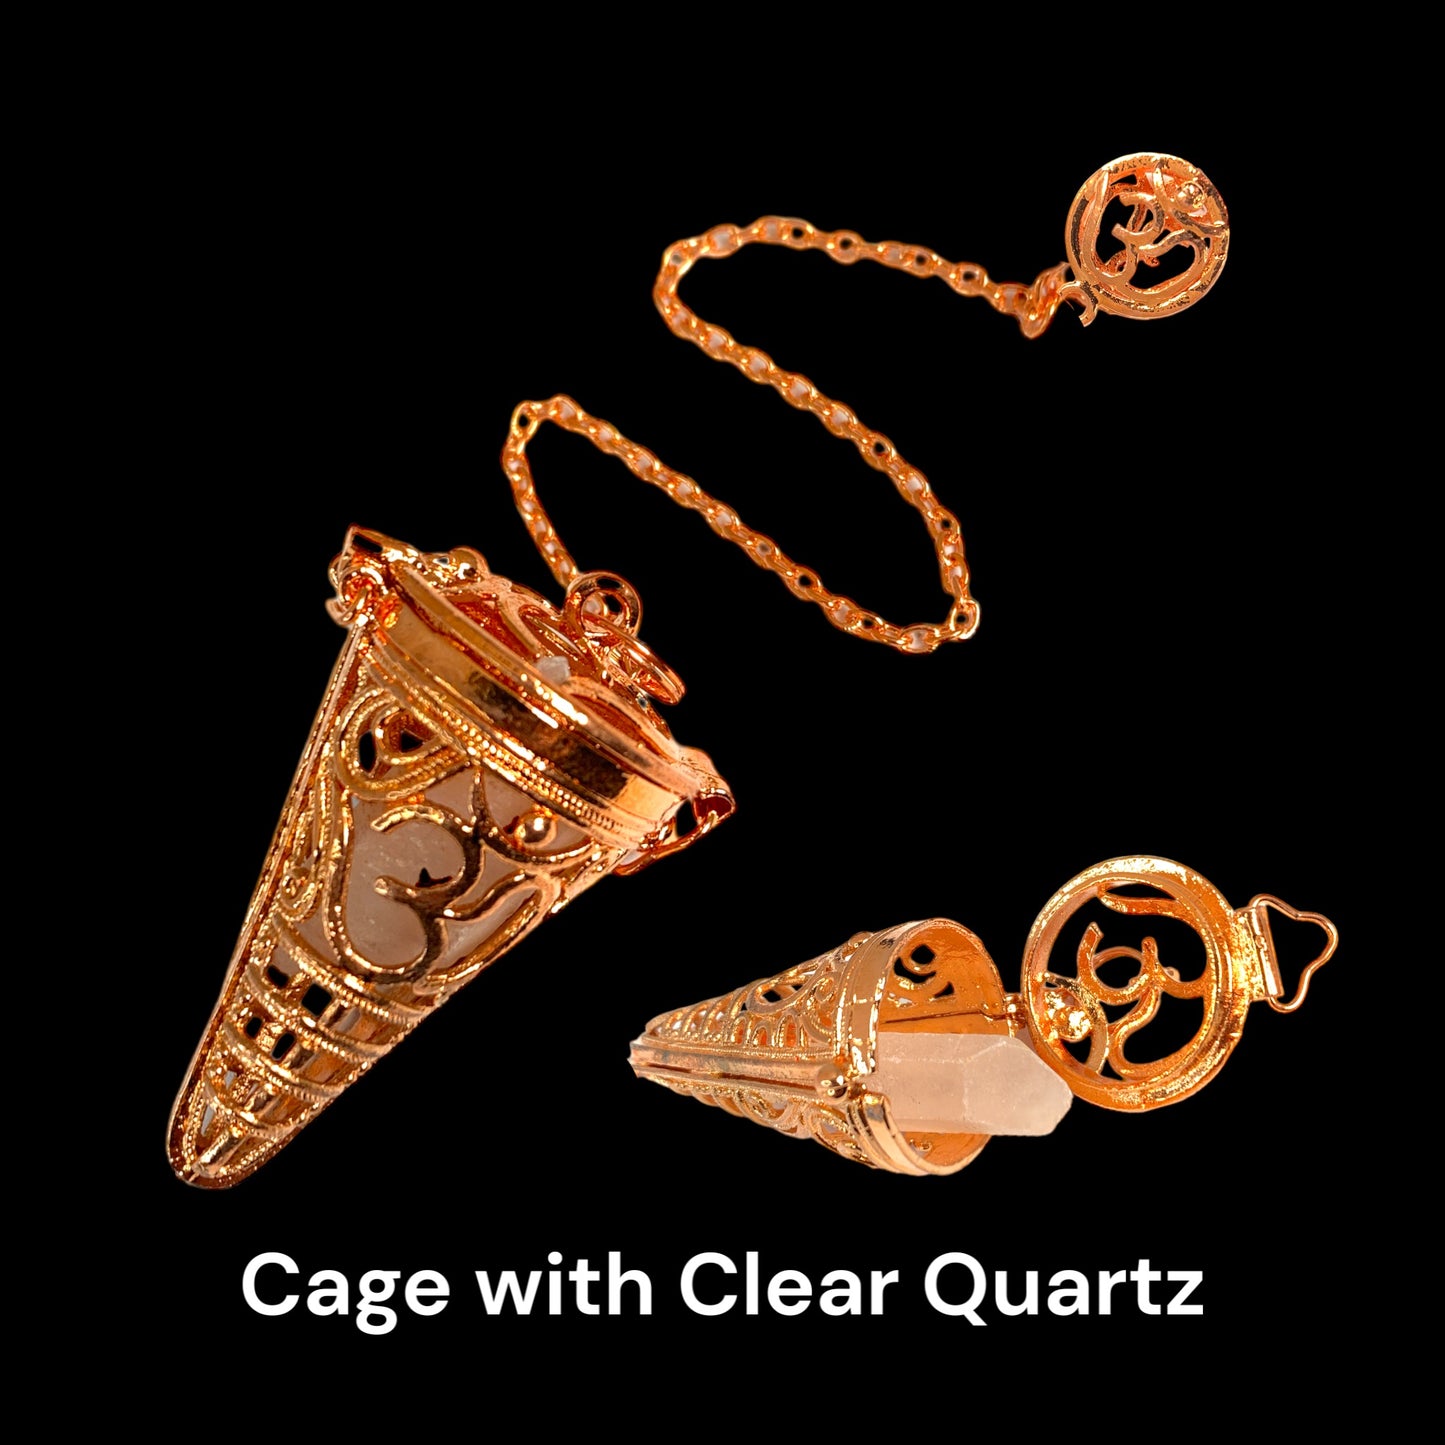 Bronze Om Filigree Cage with Crystal Point Pendulum - 55mm 20g - NEW422